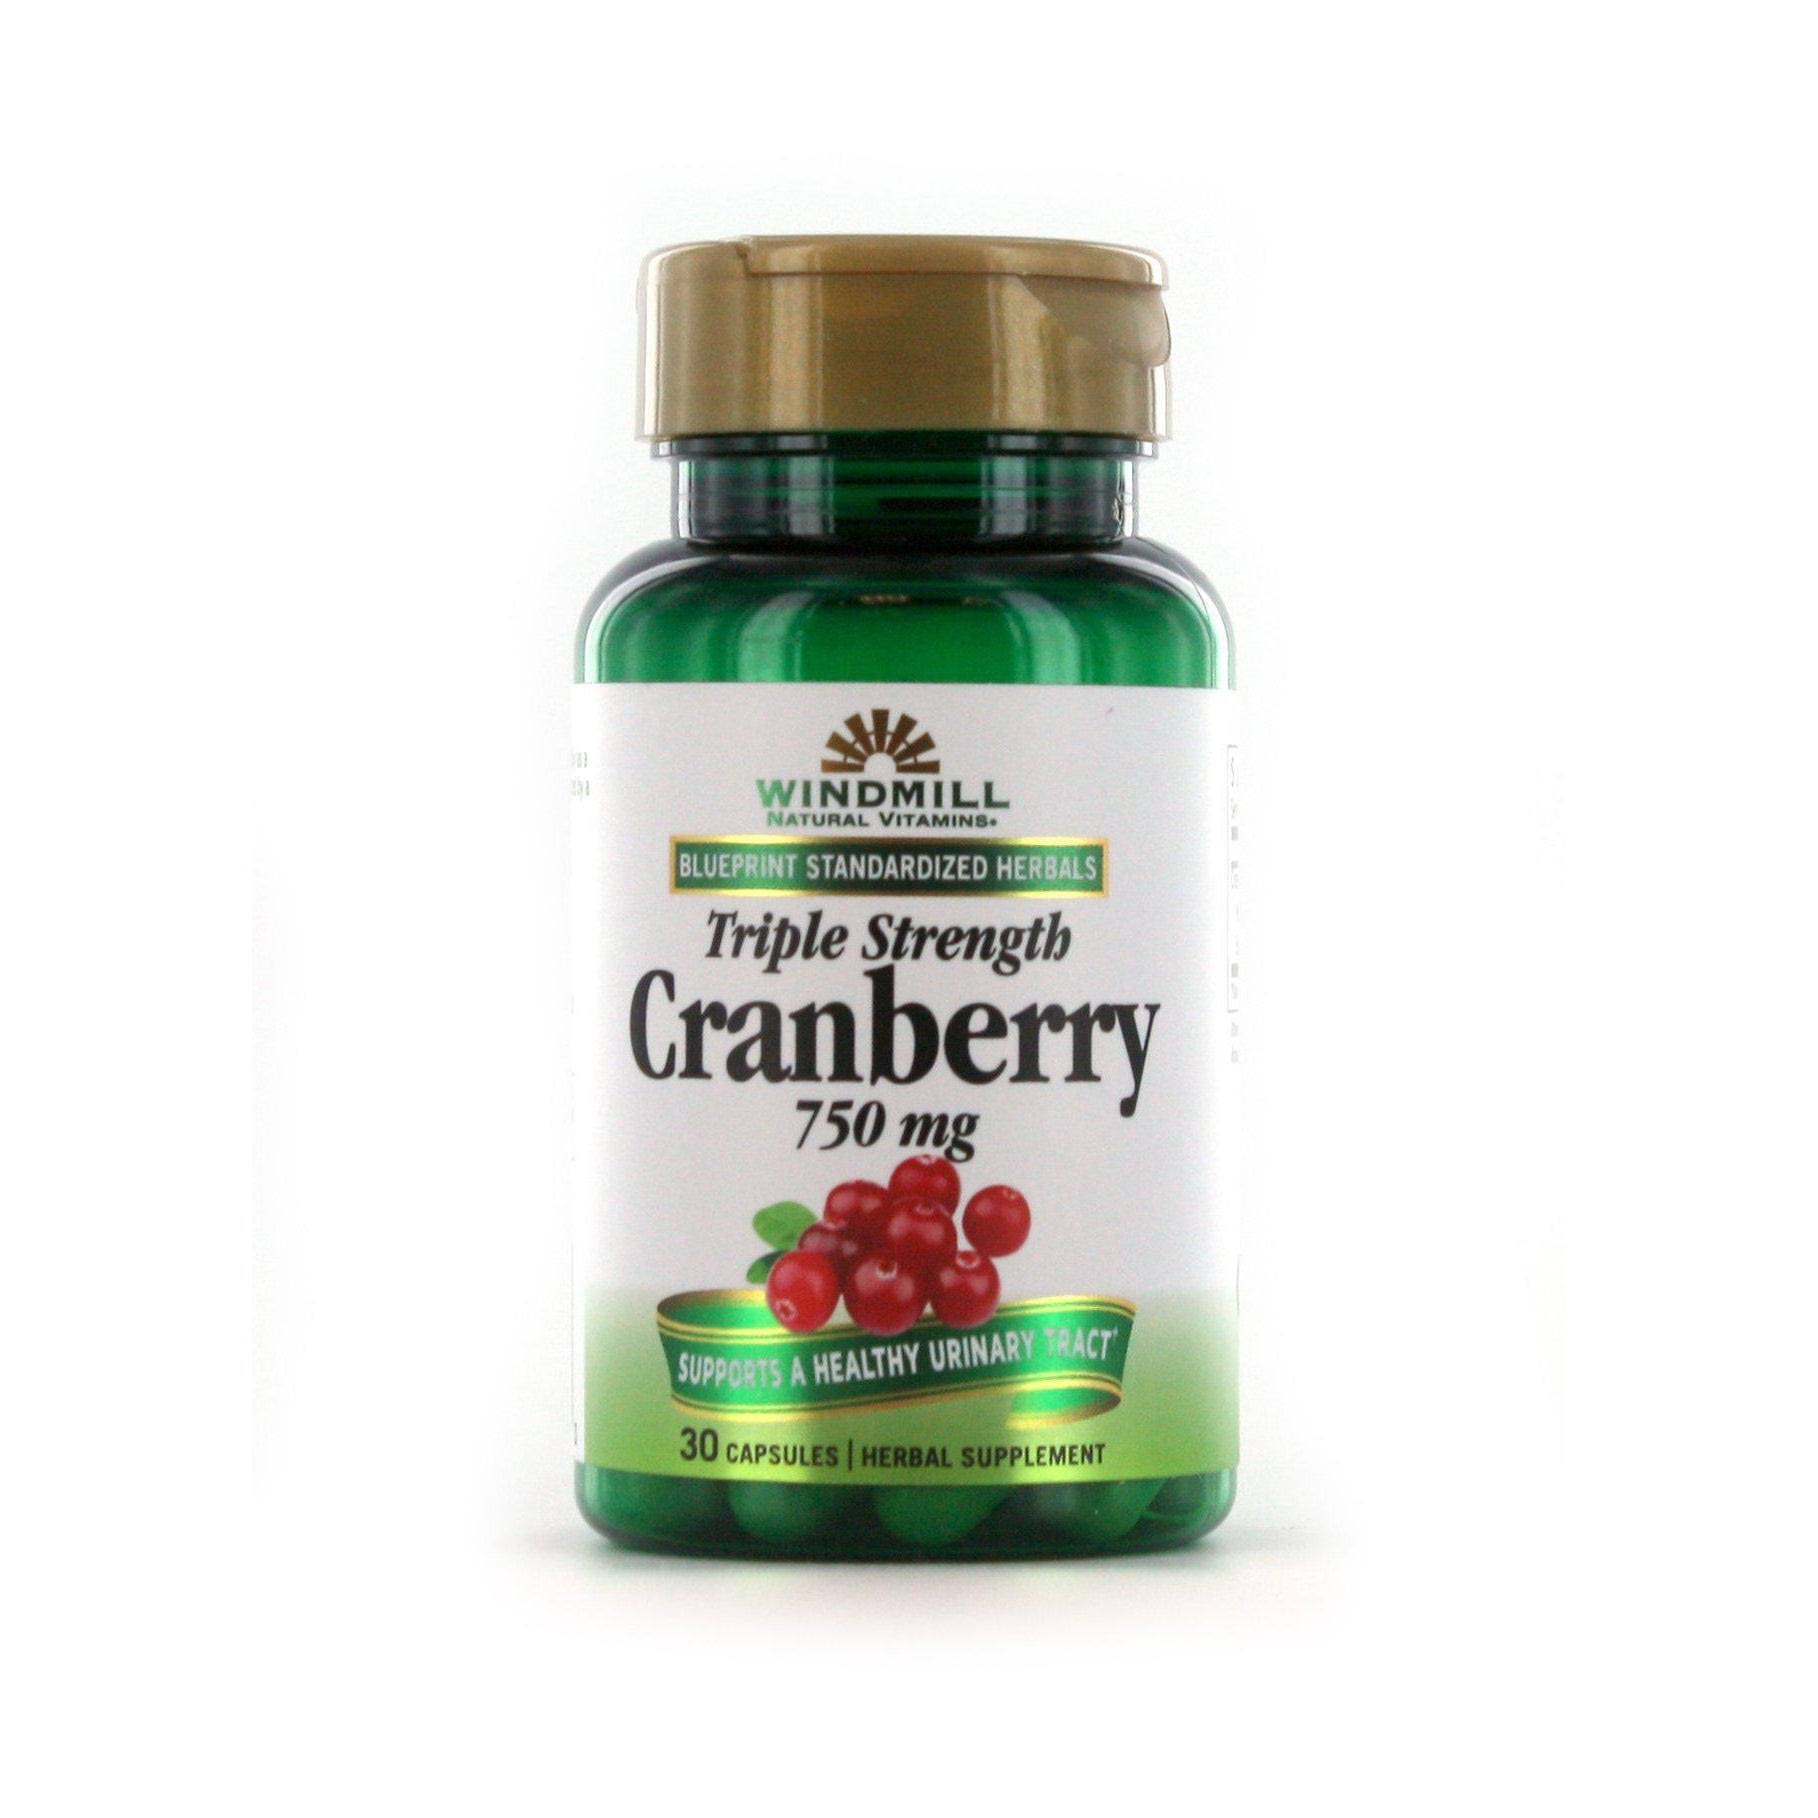 Windmill Vitamins Cranberry Dietary Supplement Capsules - 750mg, x30